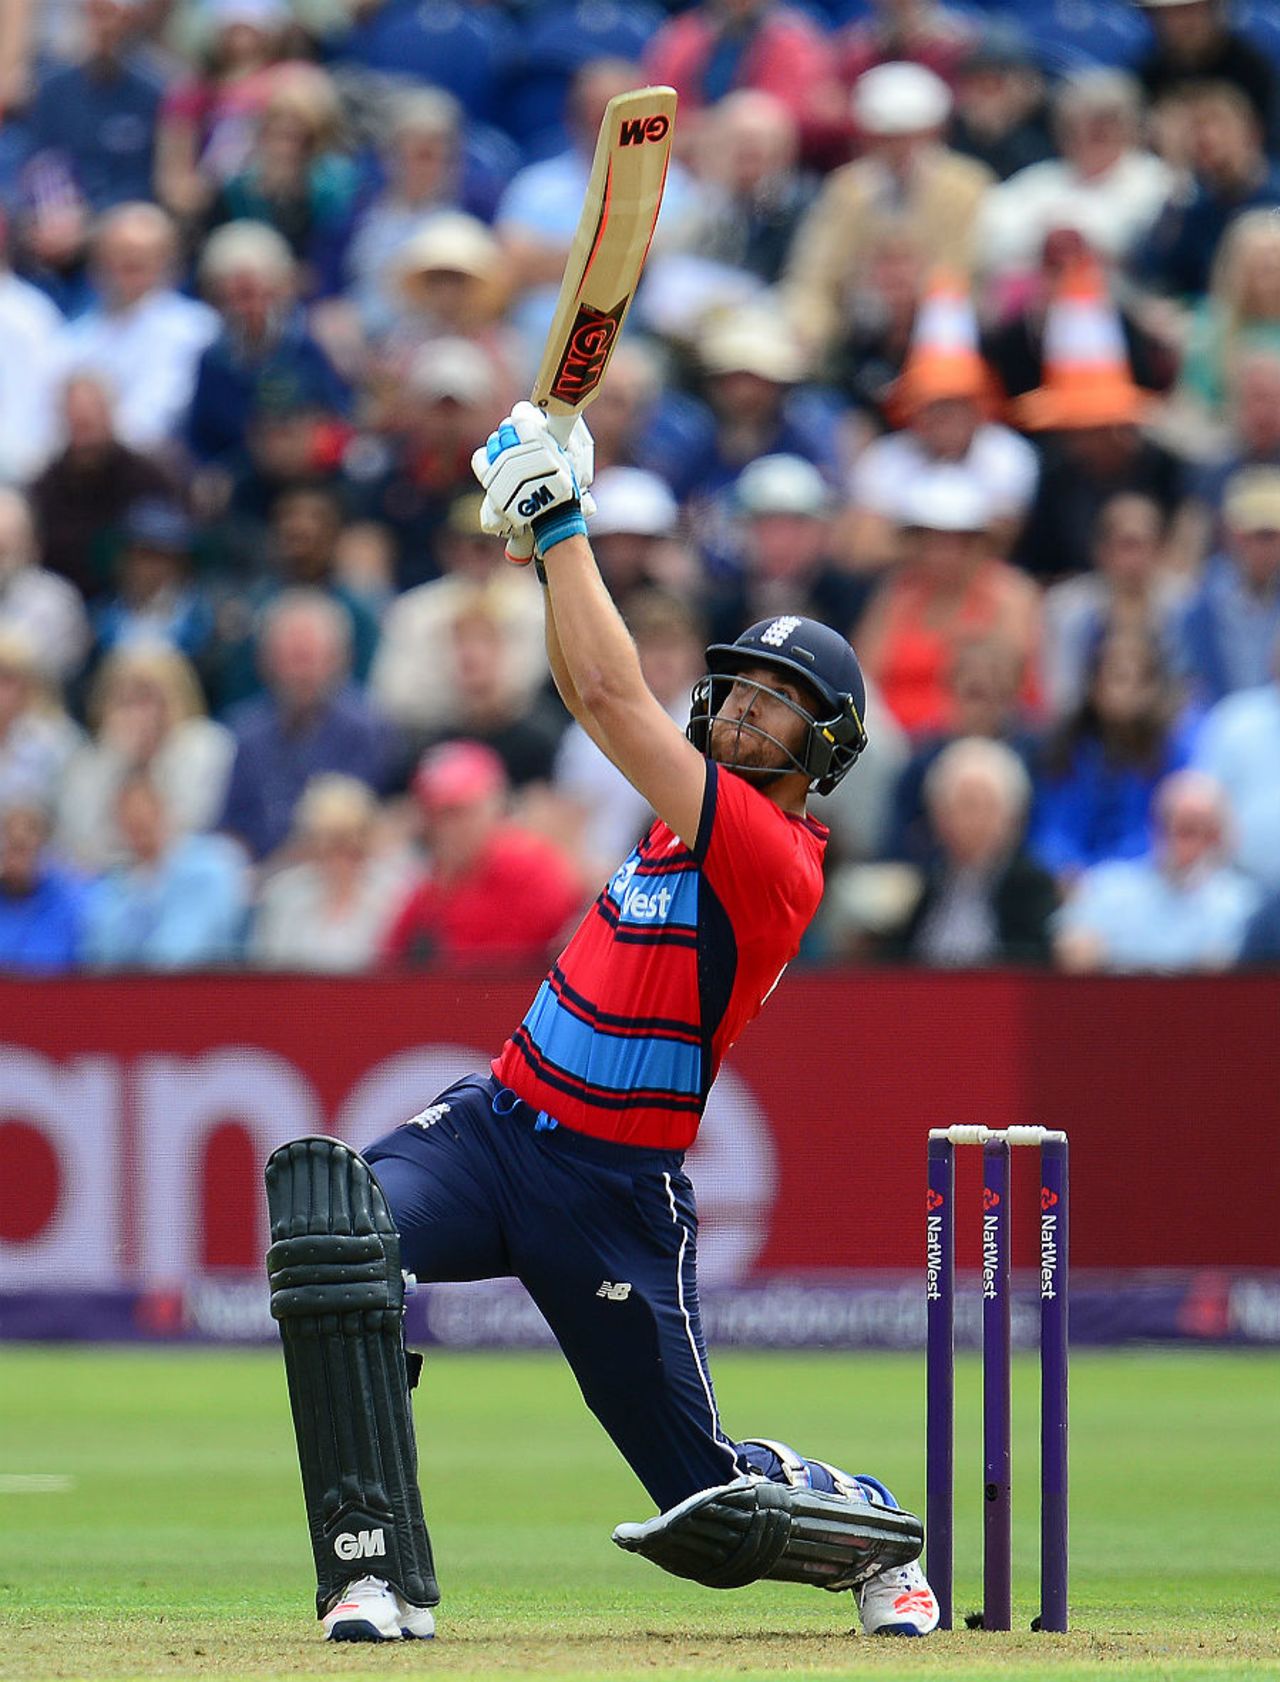 Dawid Malan cut loose to make a fine half-century on debut, England v South Africa, 3rd T20I, Cardiff, June 25, 2017